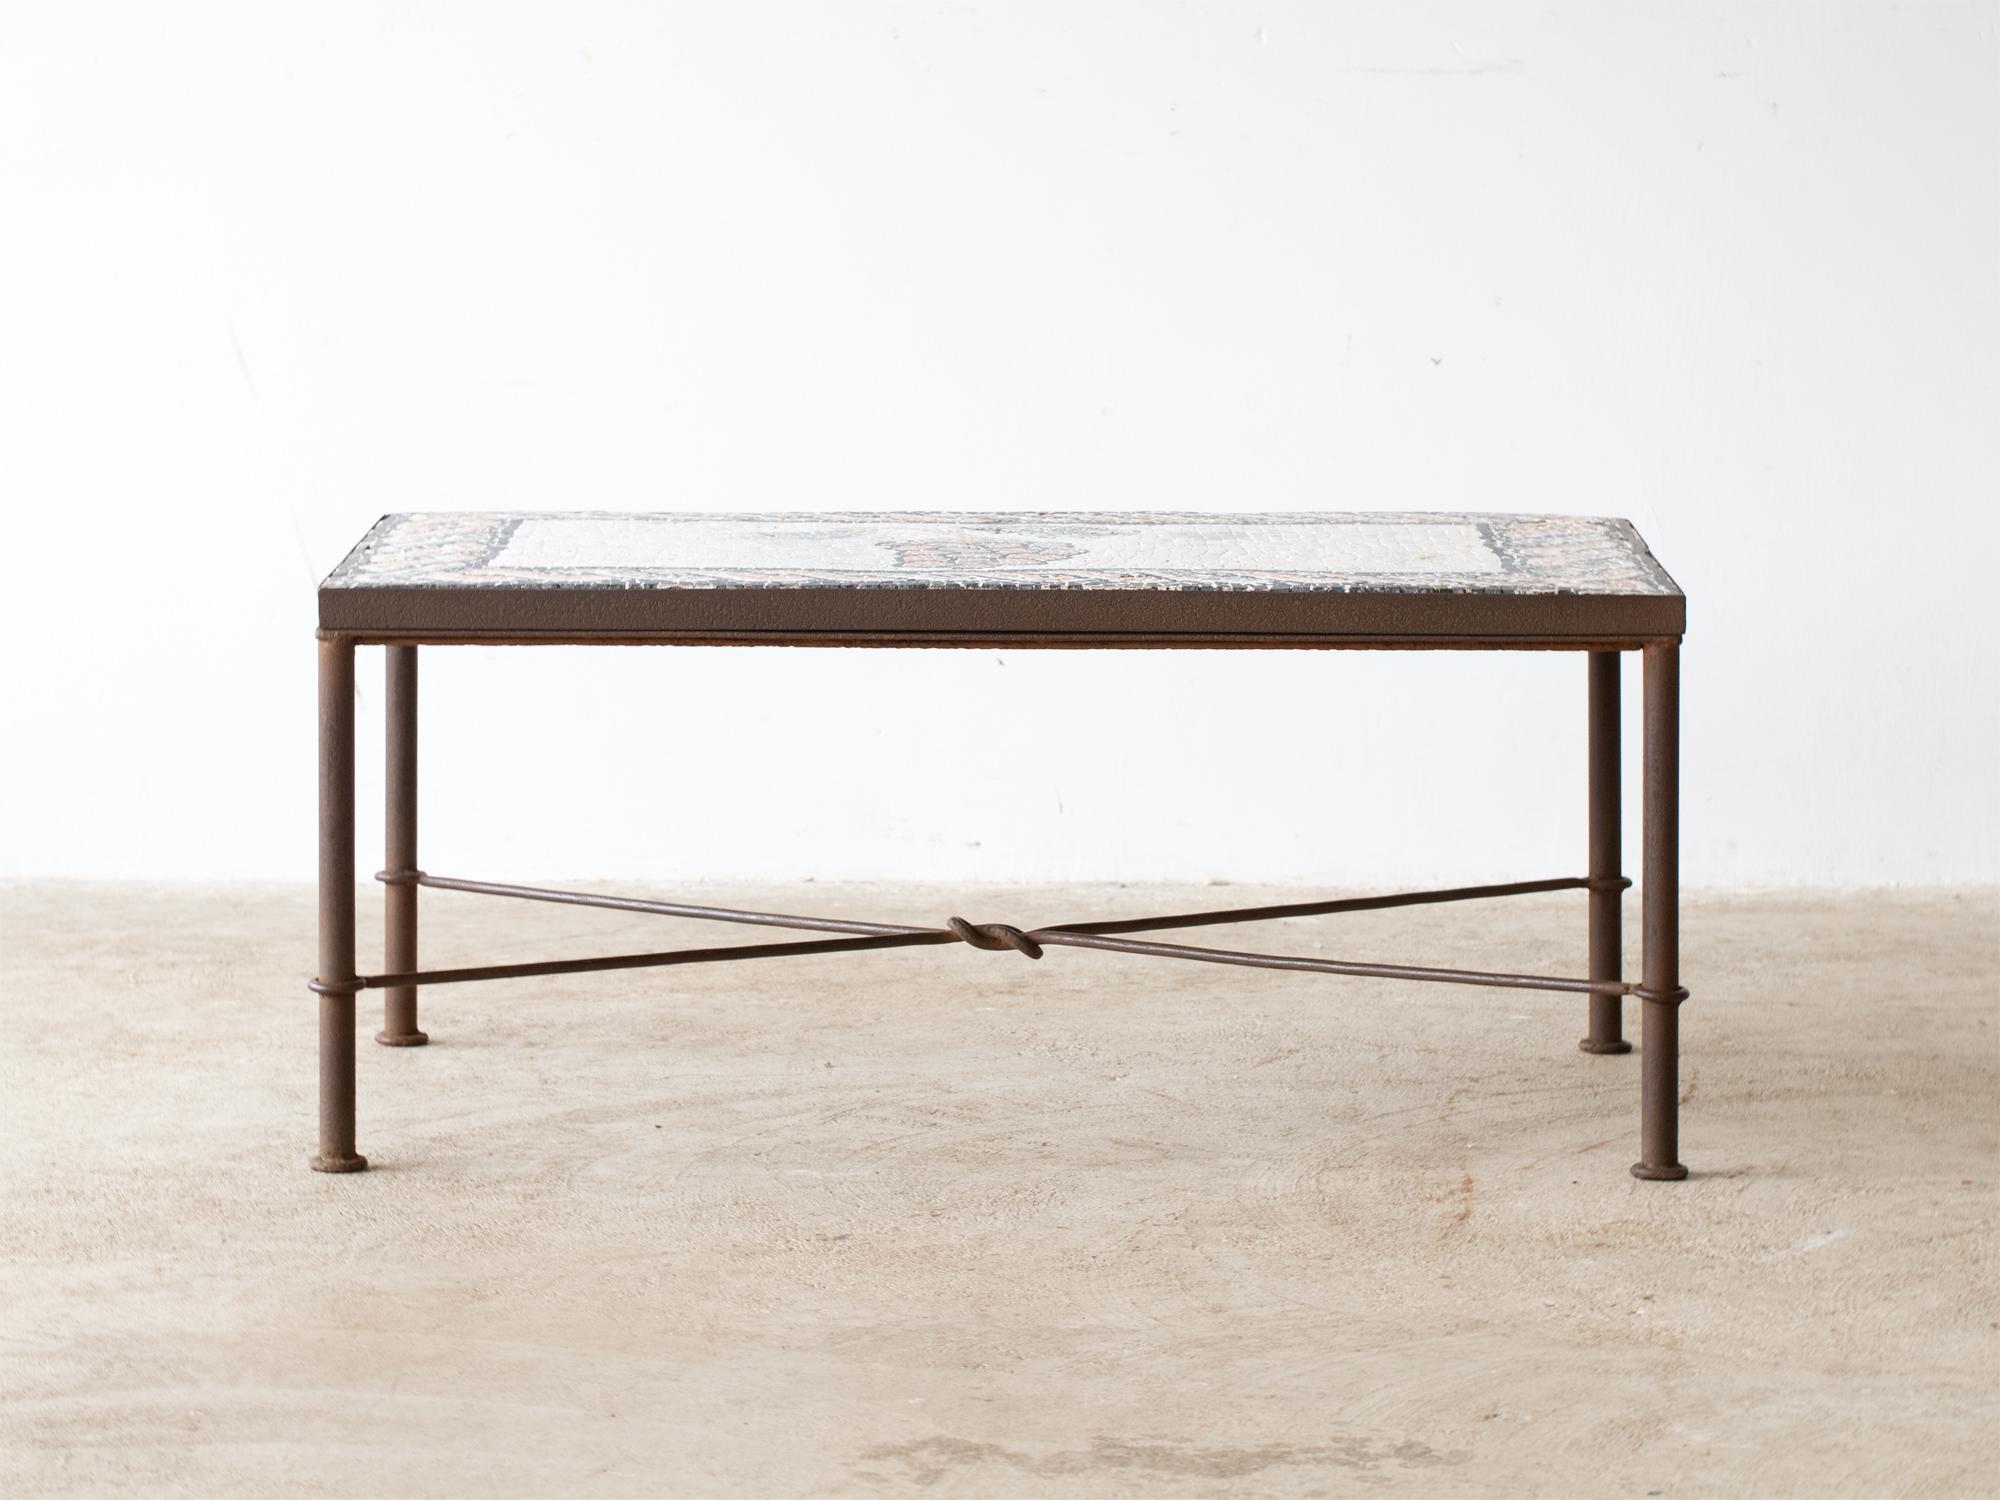 An artisanal mosaic coffee table raised on a forged iron base. French, c. 1960s. 

Stock ref. #2304

In good sturdy order, some losses to the mosaic. 

43.5 x 101 x 62 cm

17.1 x 39.8 x 24.4 “